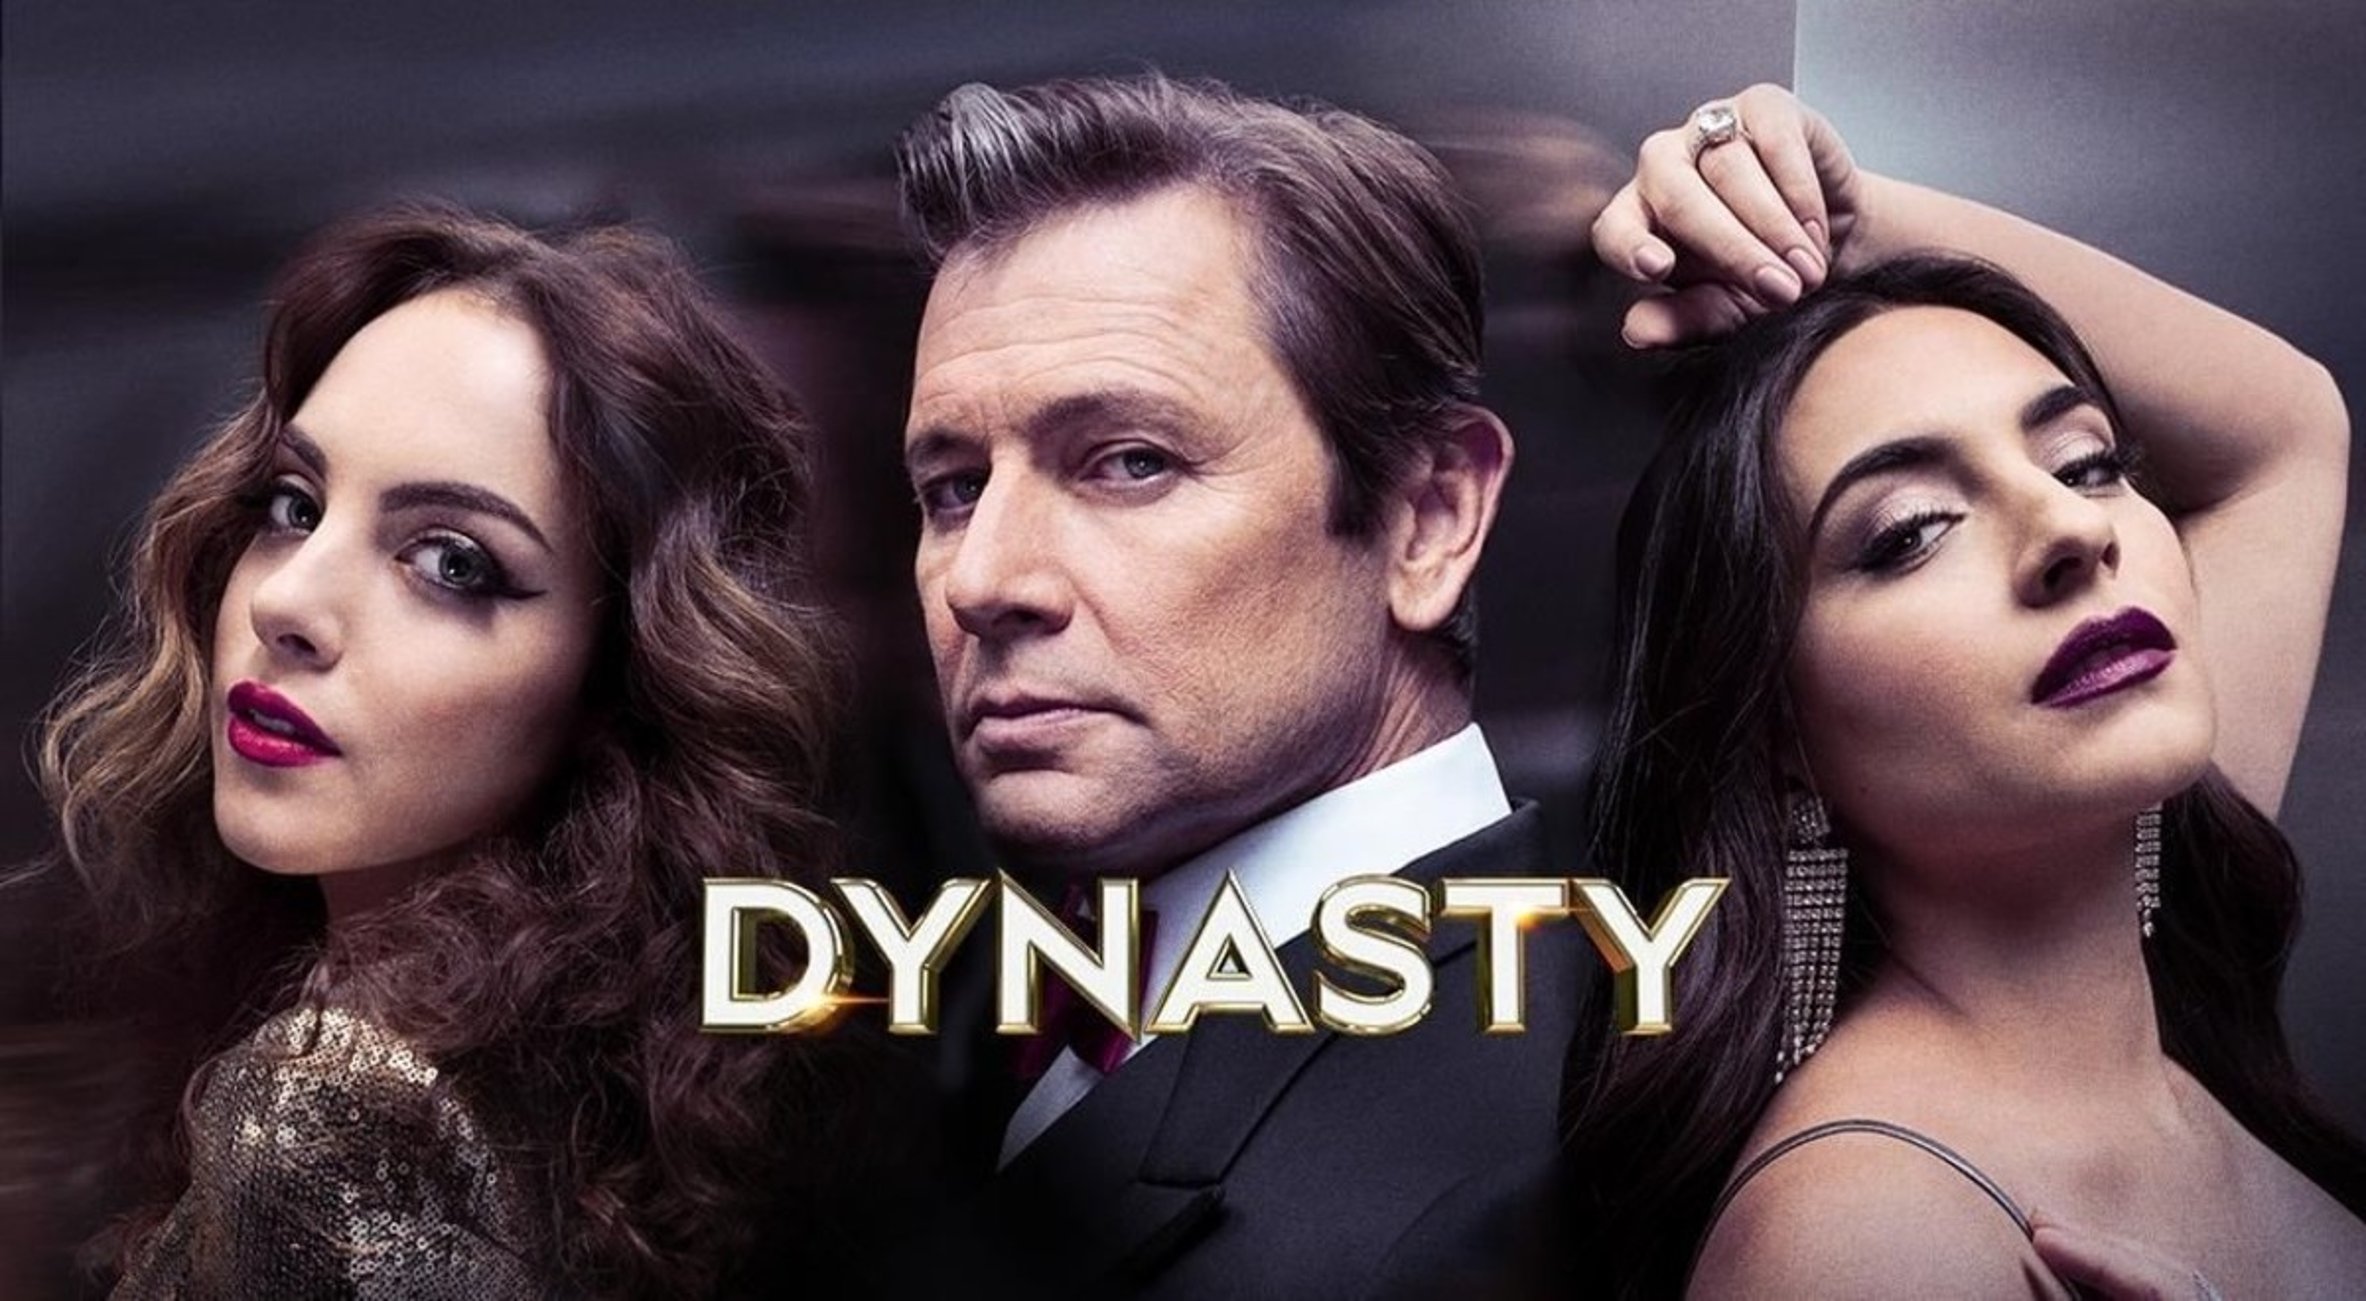 Seeking Extra's For The CW's Dynasty ?